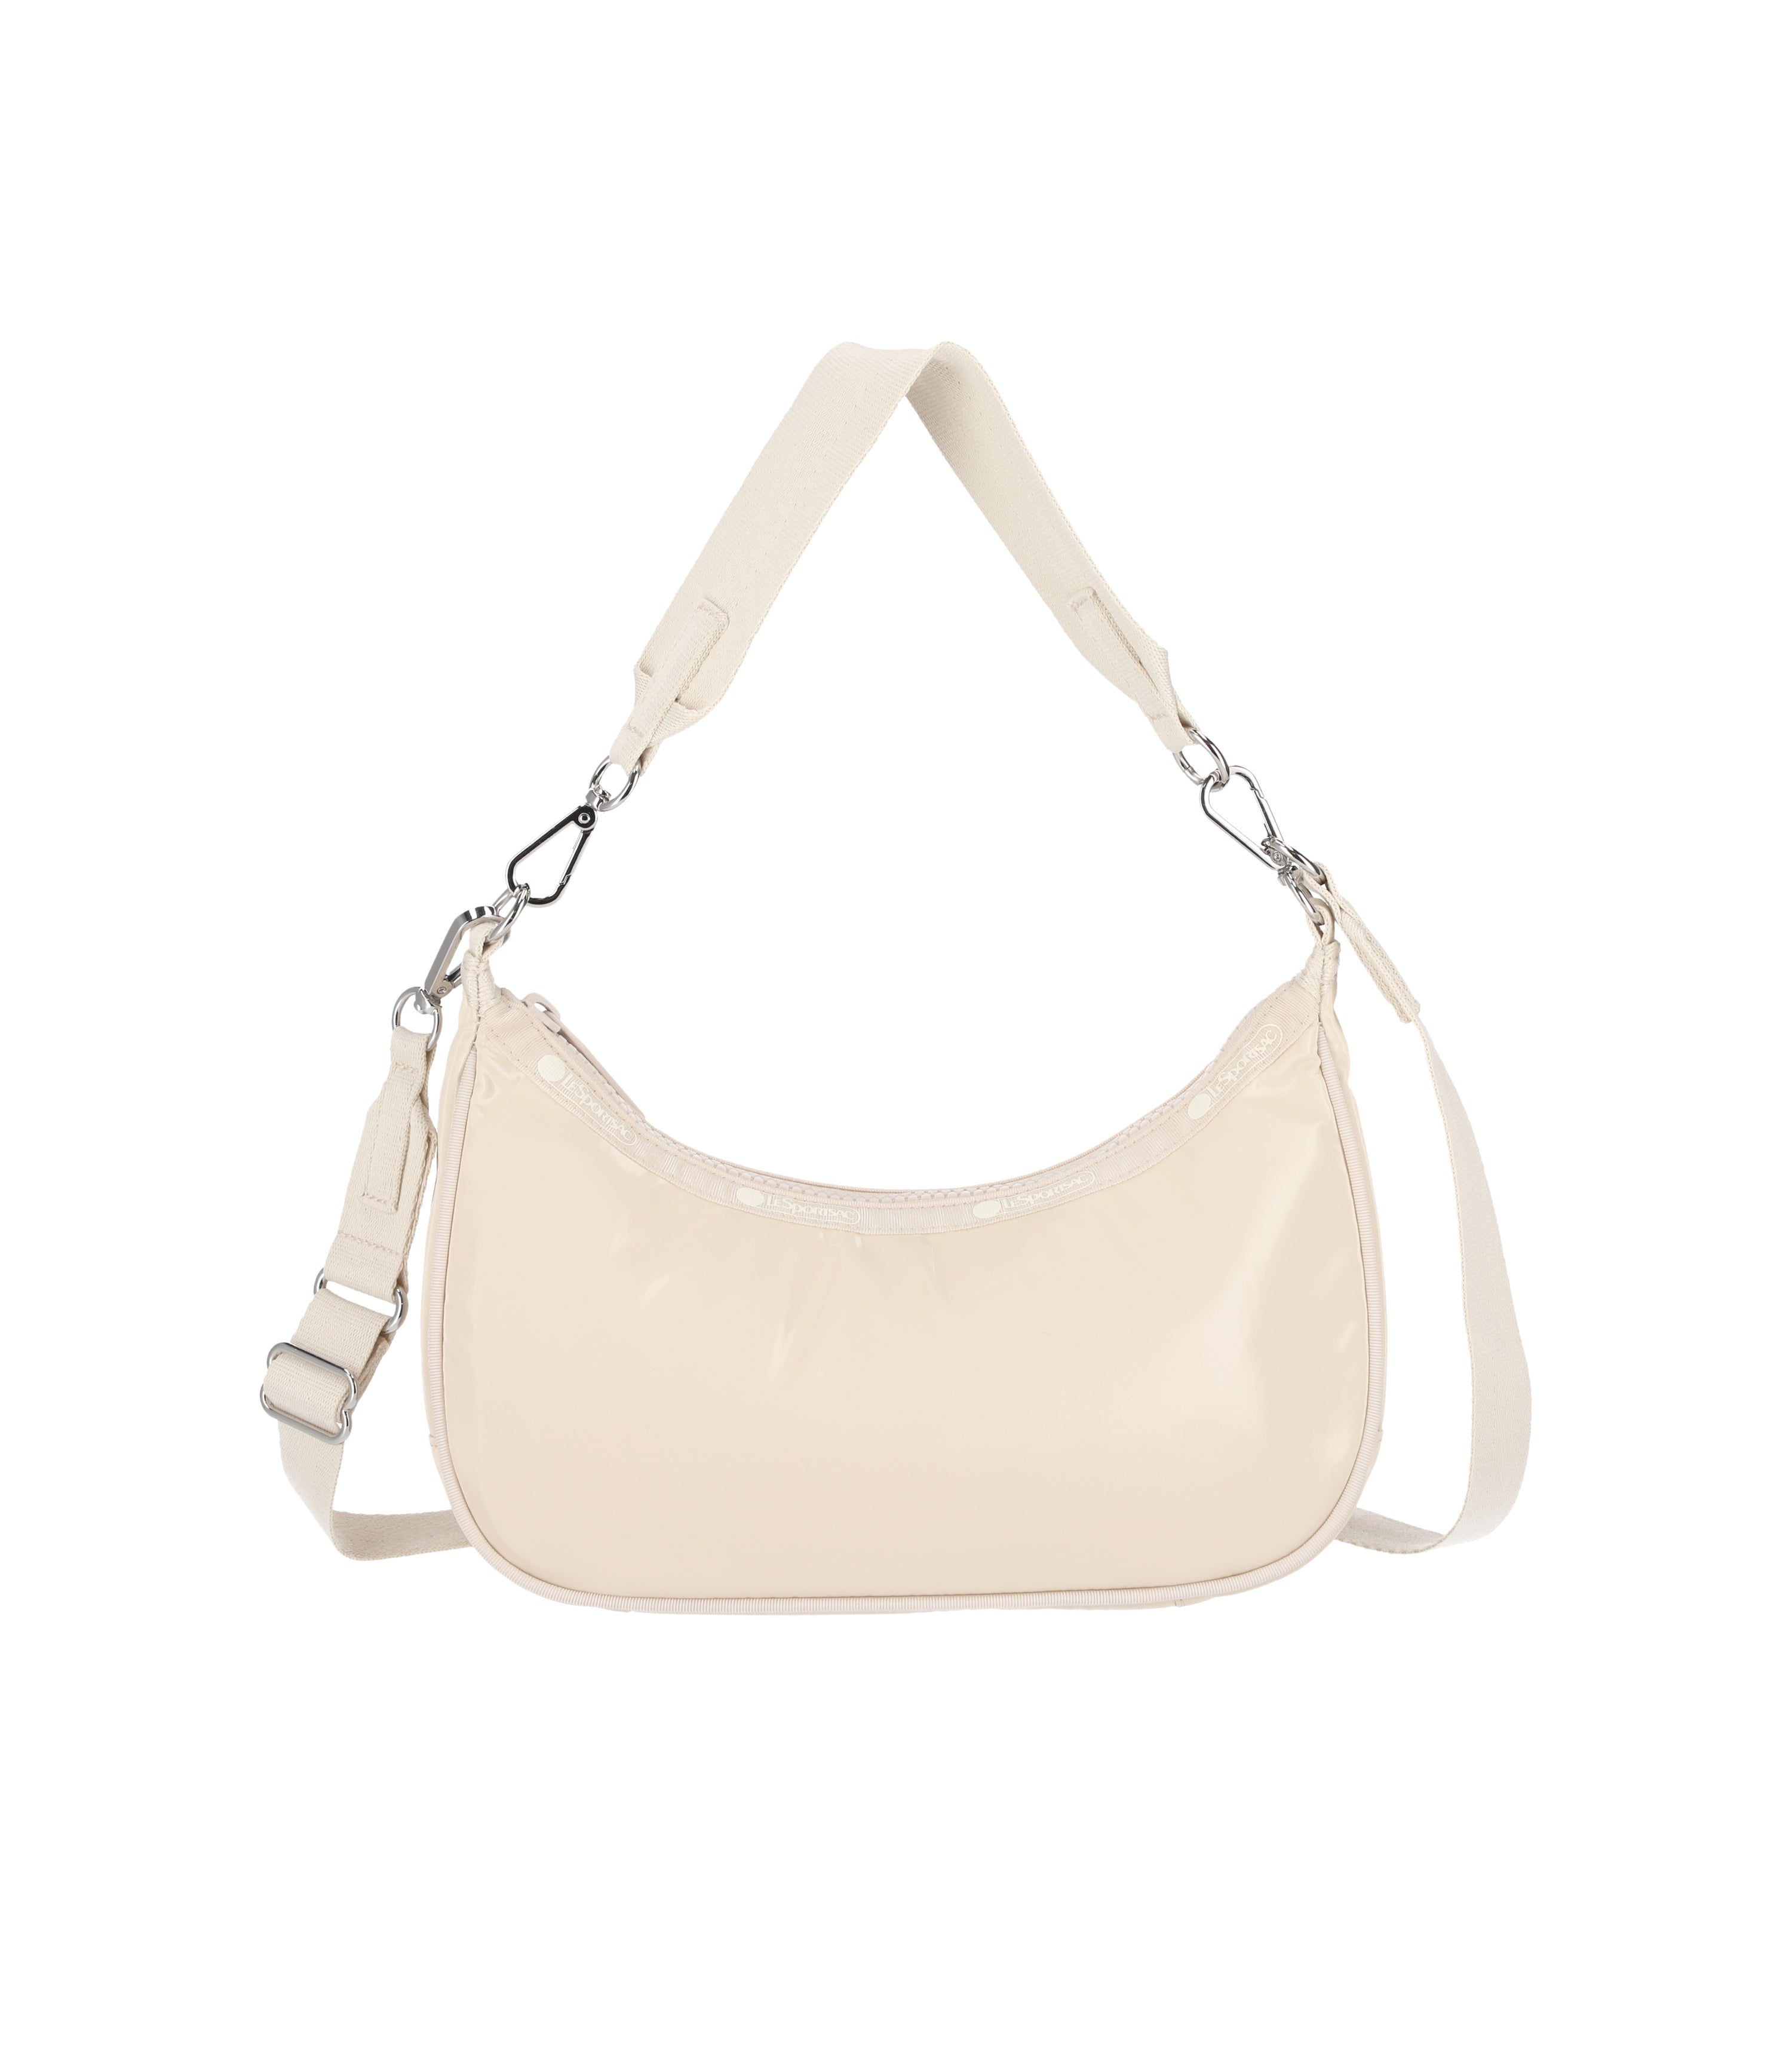 Patent Leather Hobo Bags & Purses for Women